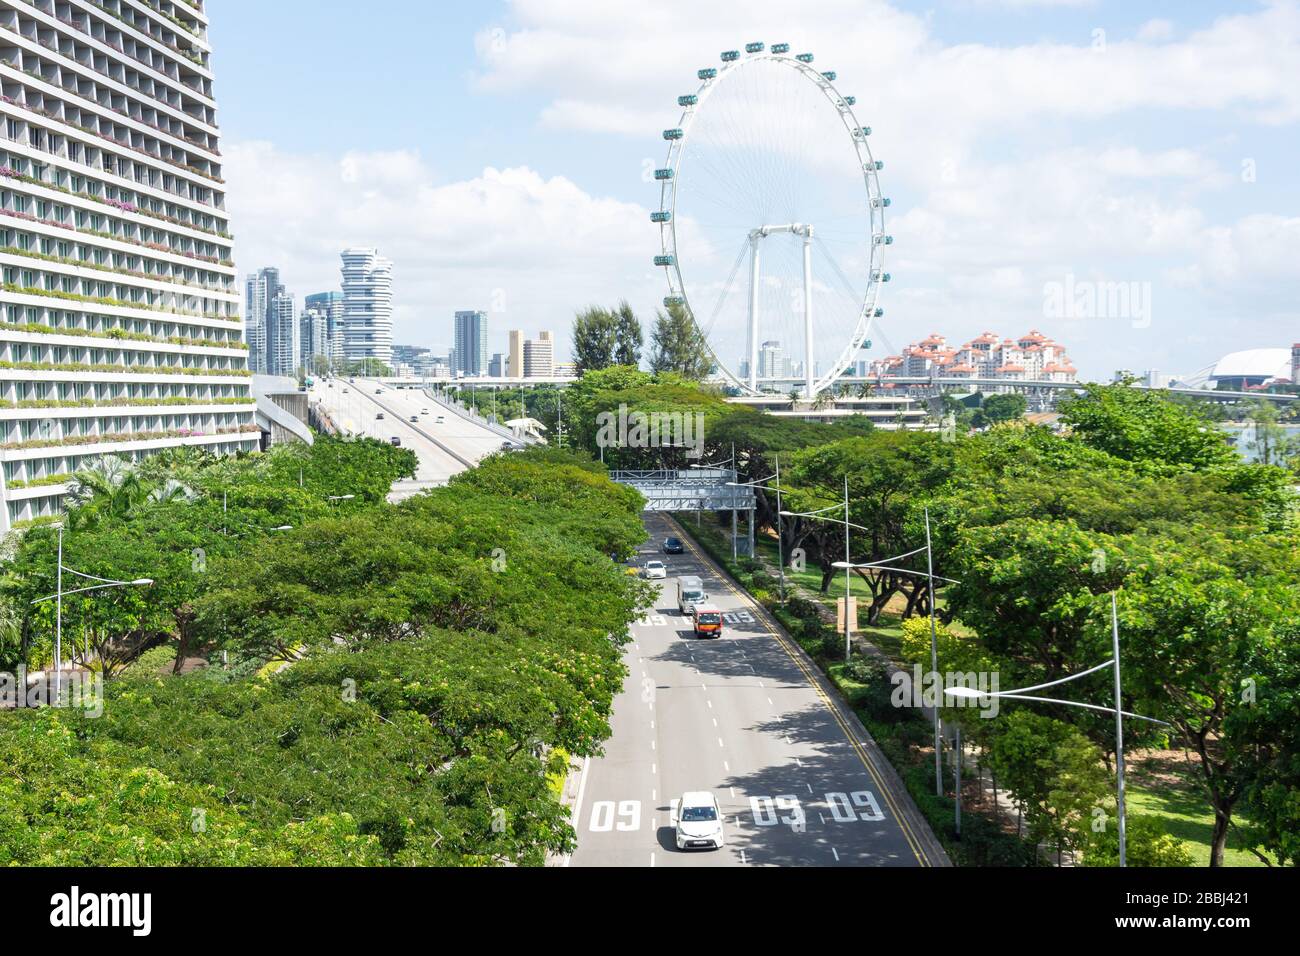 Singapore Flyer observation wheel and Sheares Avenue from Gardens by the Bay, Marina Bay, Civic District, Singapore Stock Photo